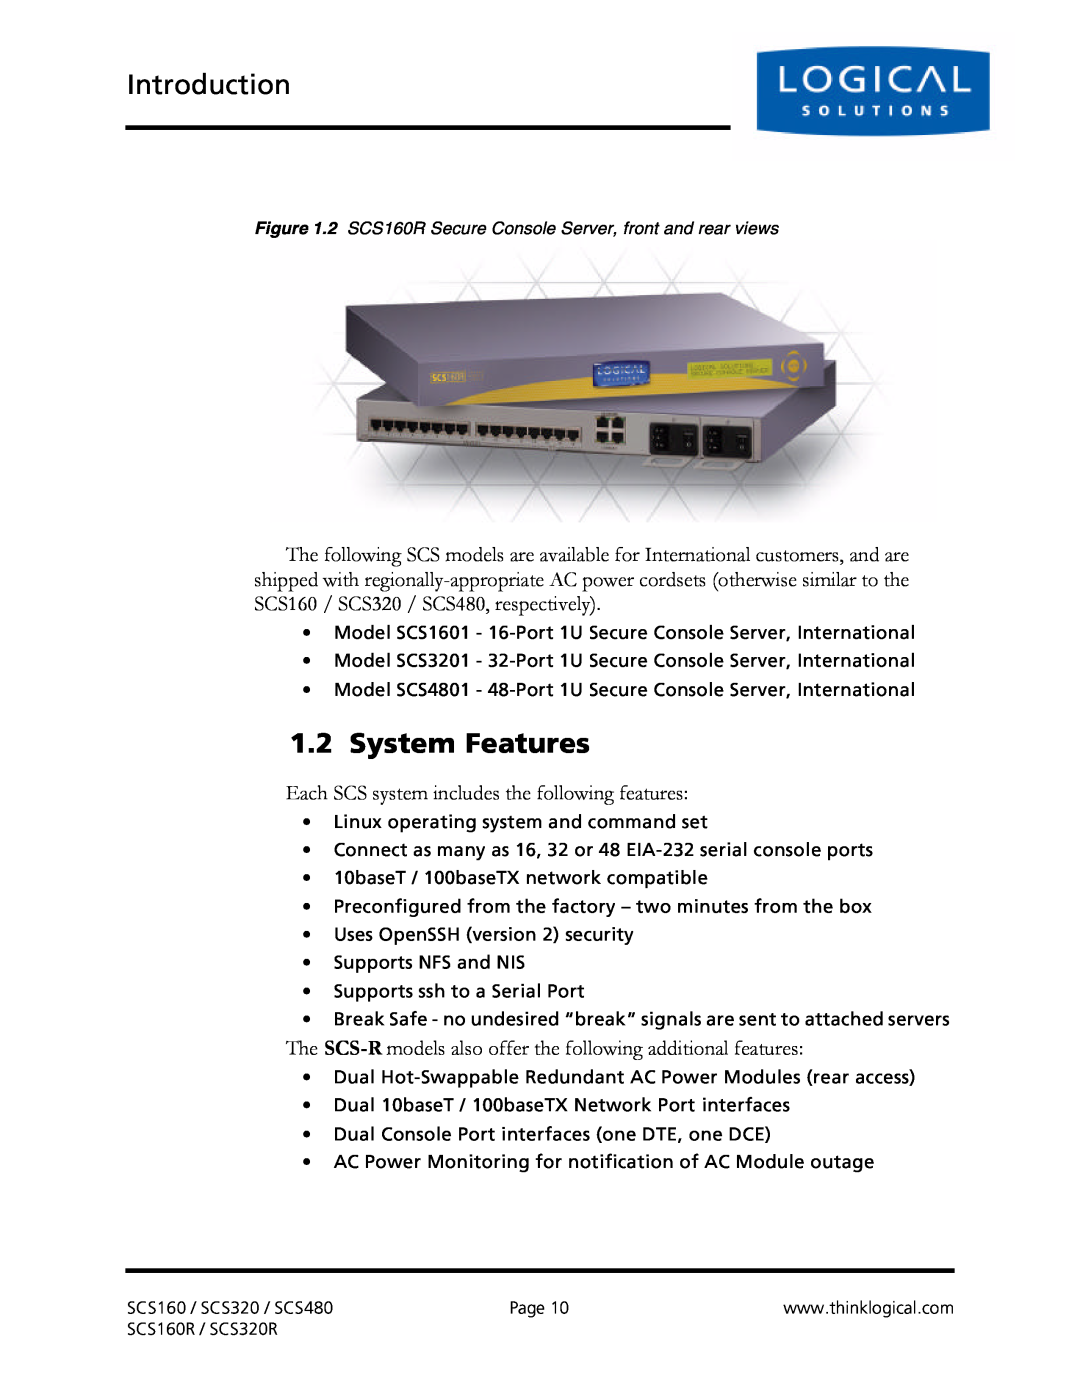 Logical Solutions SCS-R manual Introduction, System Features 